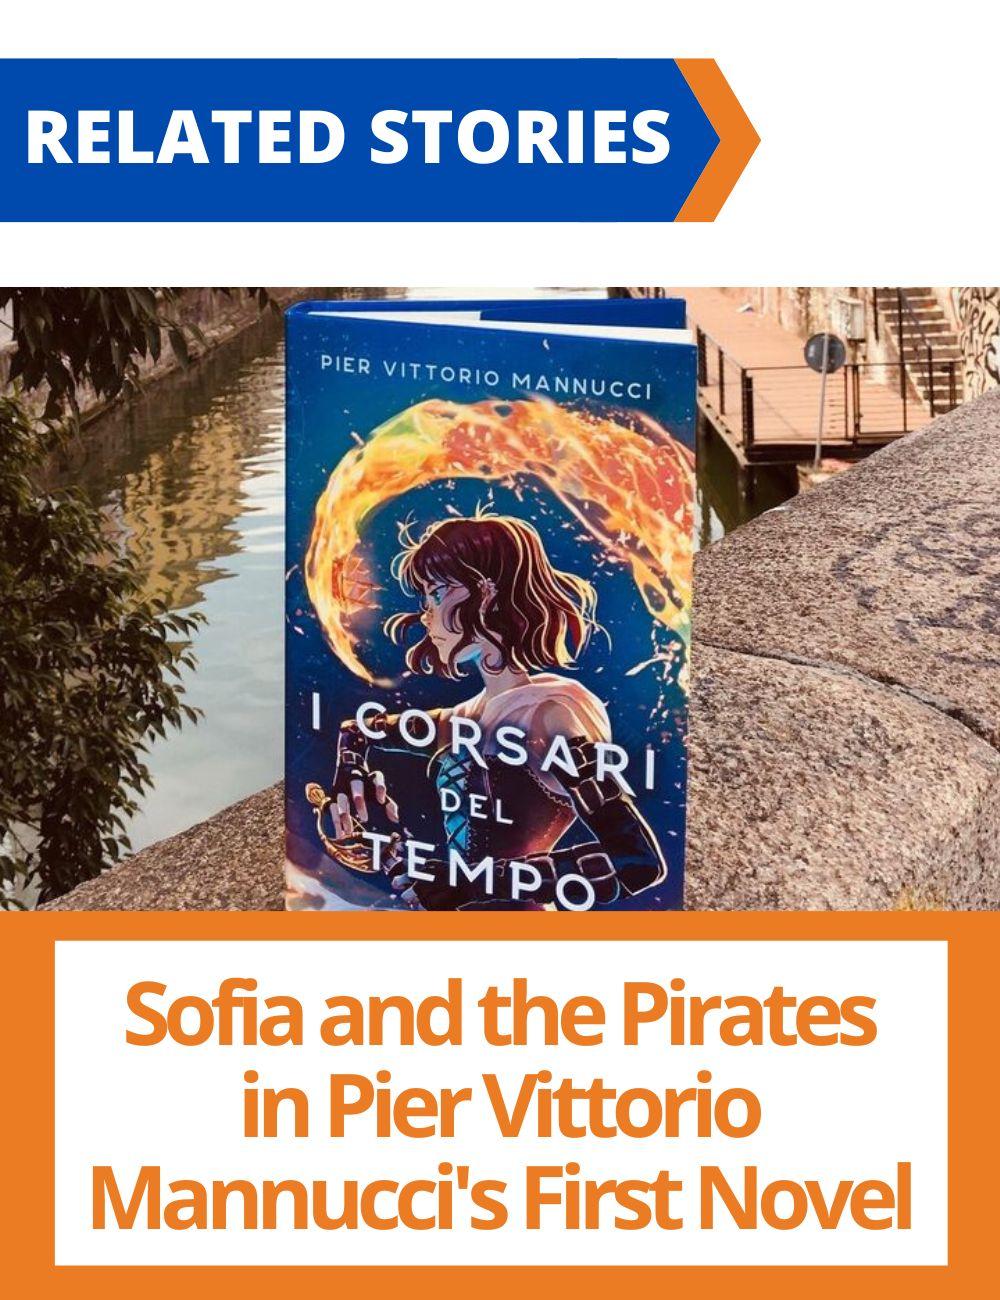 Link to related stories. Image: cover of the book I corsari del tempo. Story headline: Sofia and the Pirates in Pier Vittorio Mannucci's First Novel